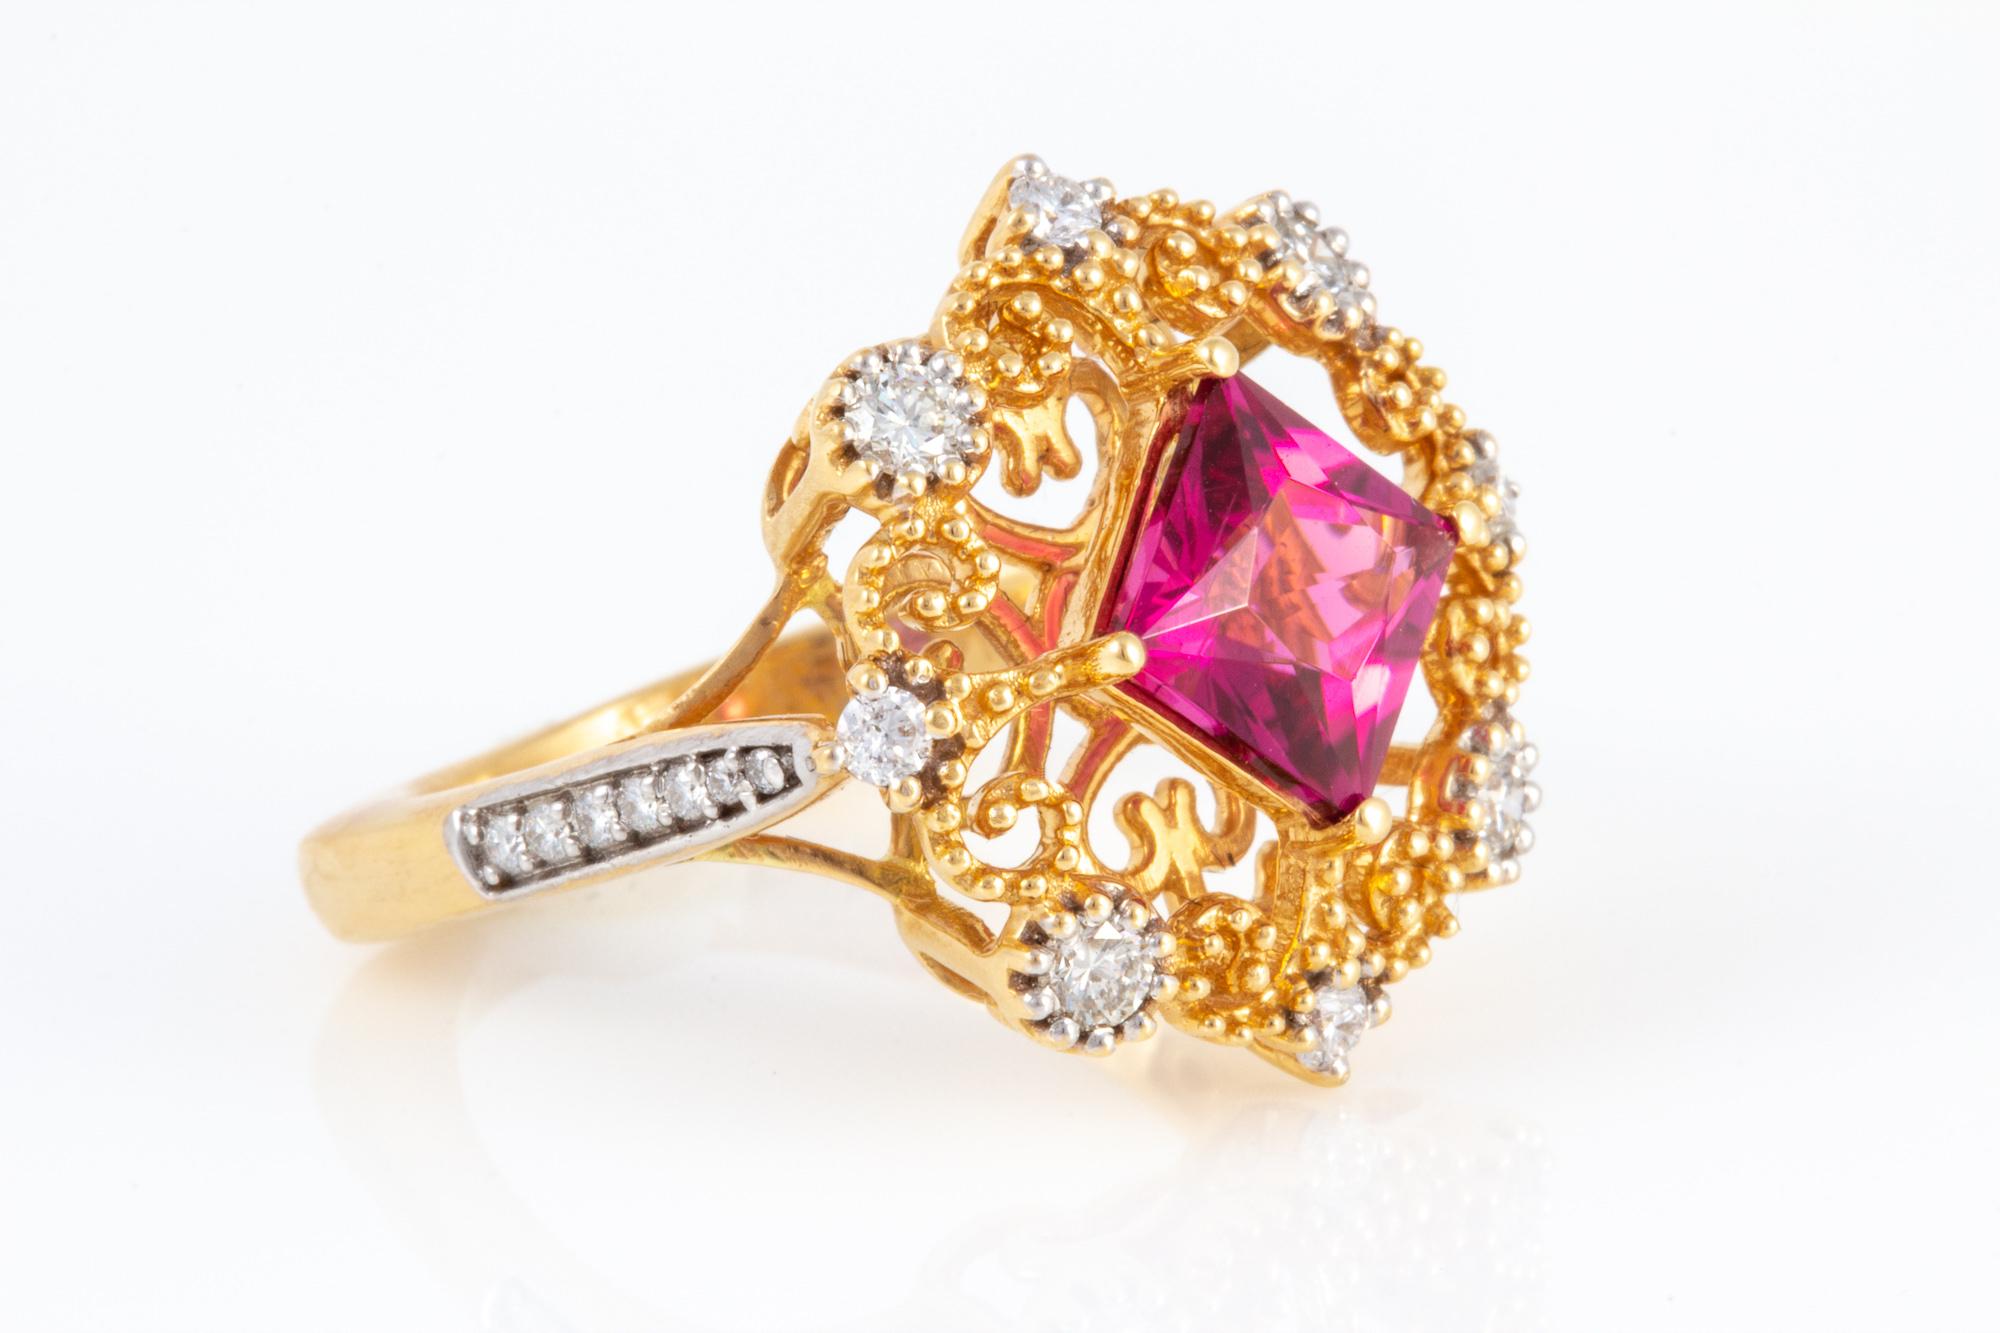 Princess Cut Rubellite Tourmaline and Diamond Ring set in 18 kt Gold For Sale